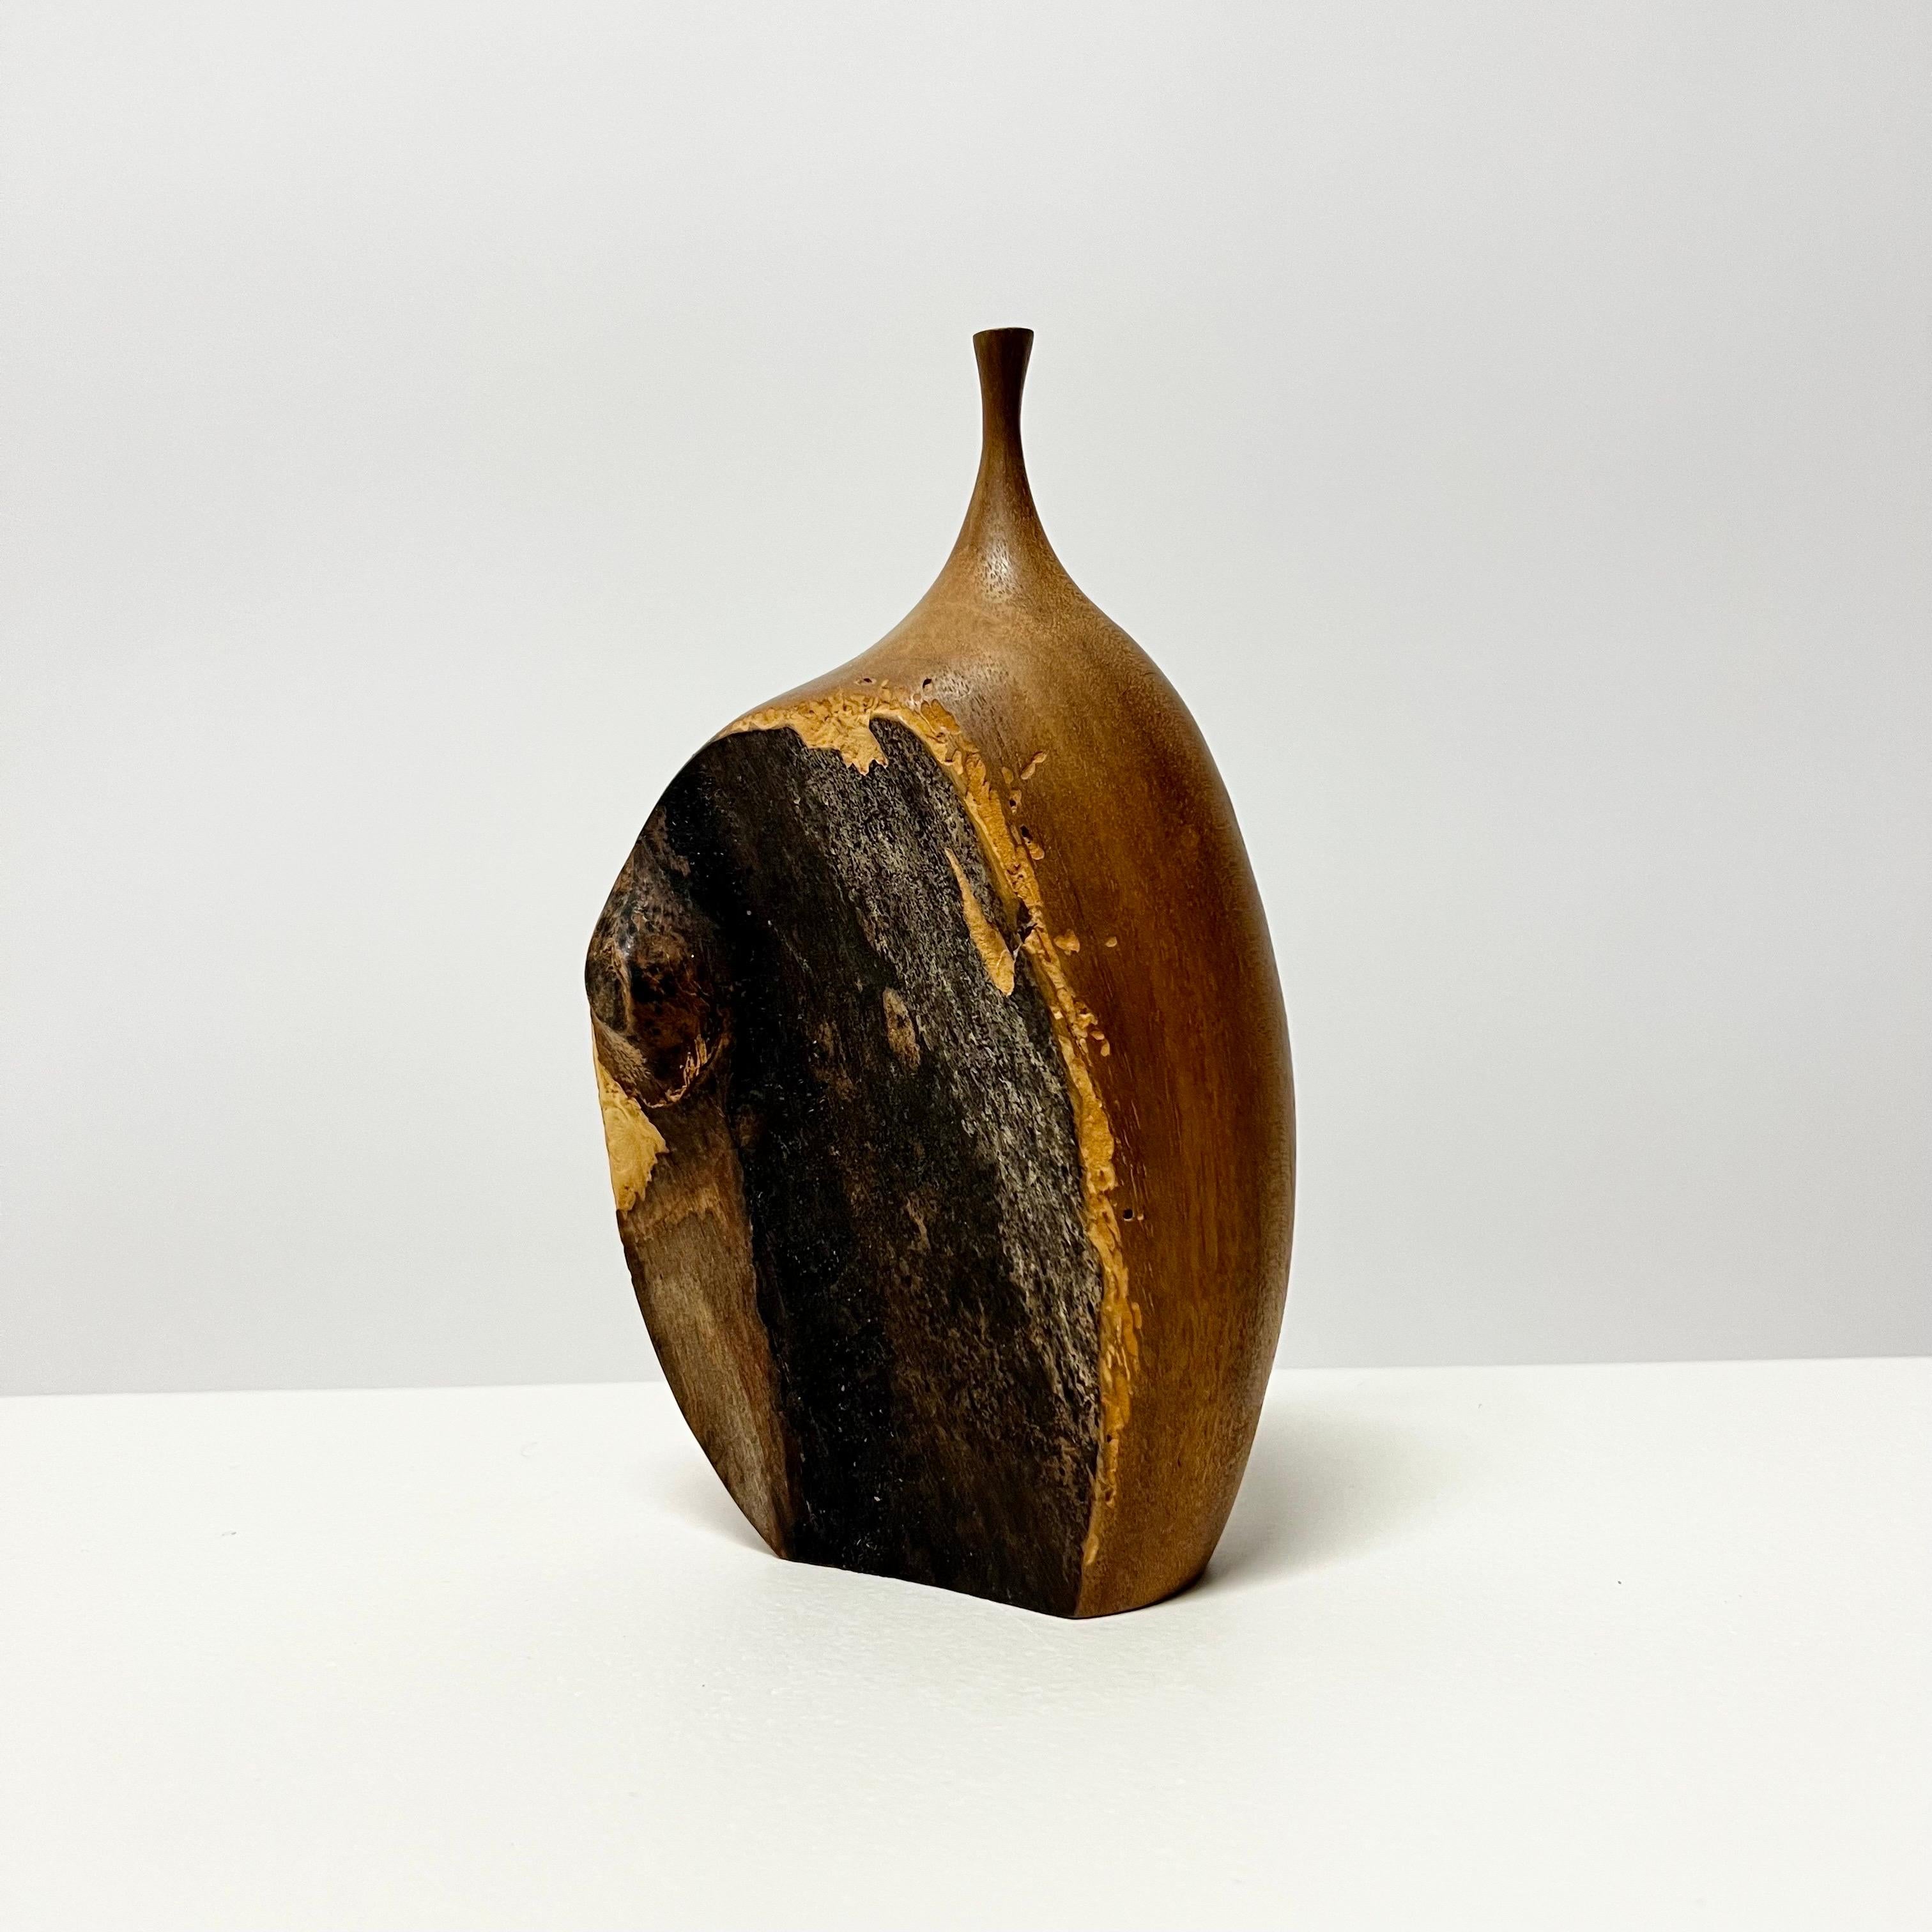 Stunning live edge black walnut vase by noted California studio artist, Doug Ayers. Signed and dated.